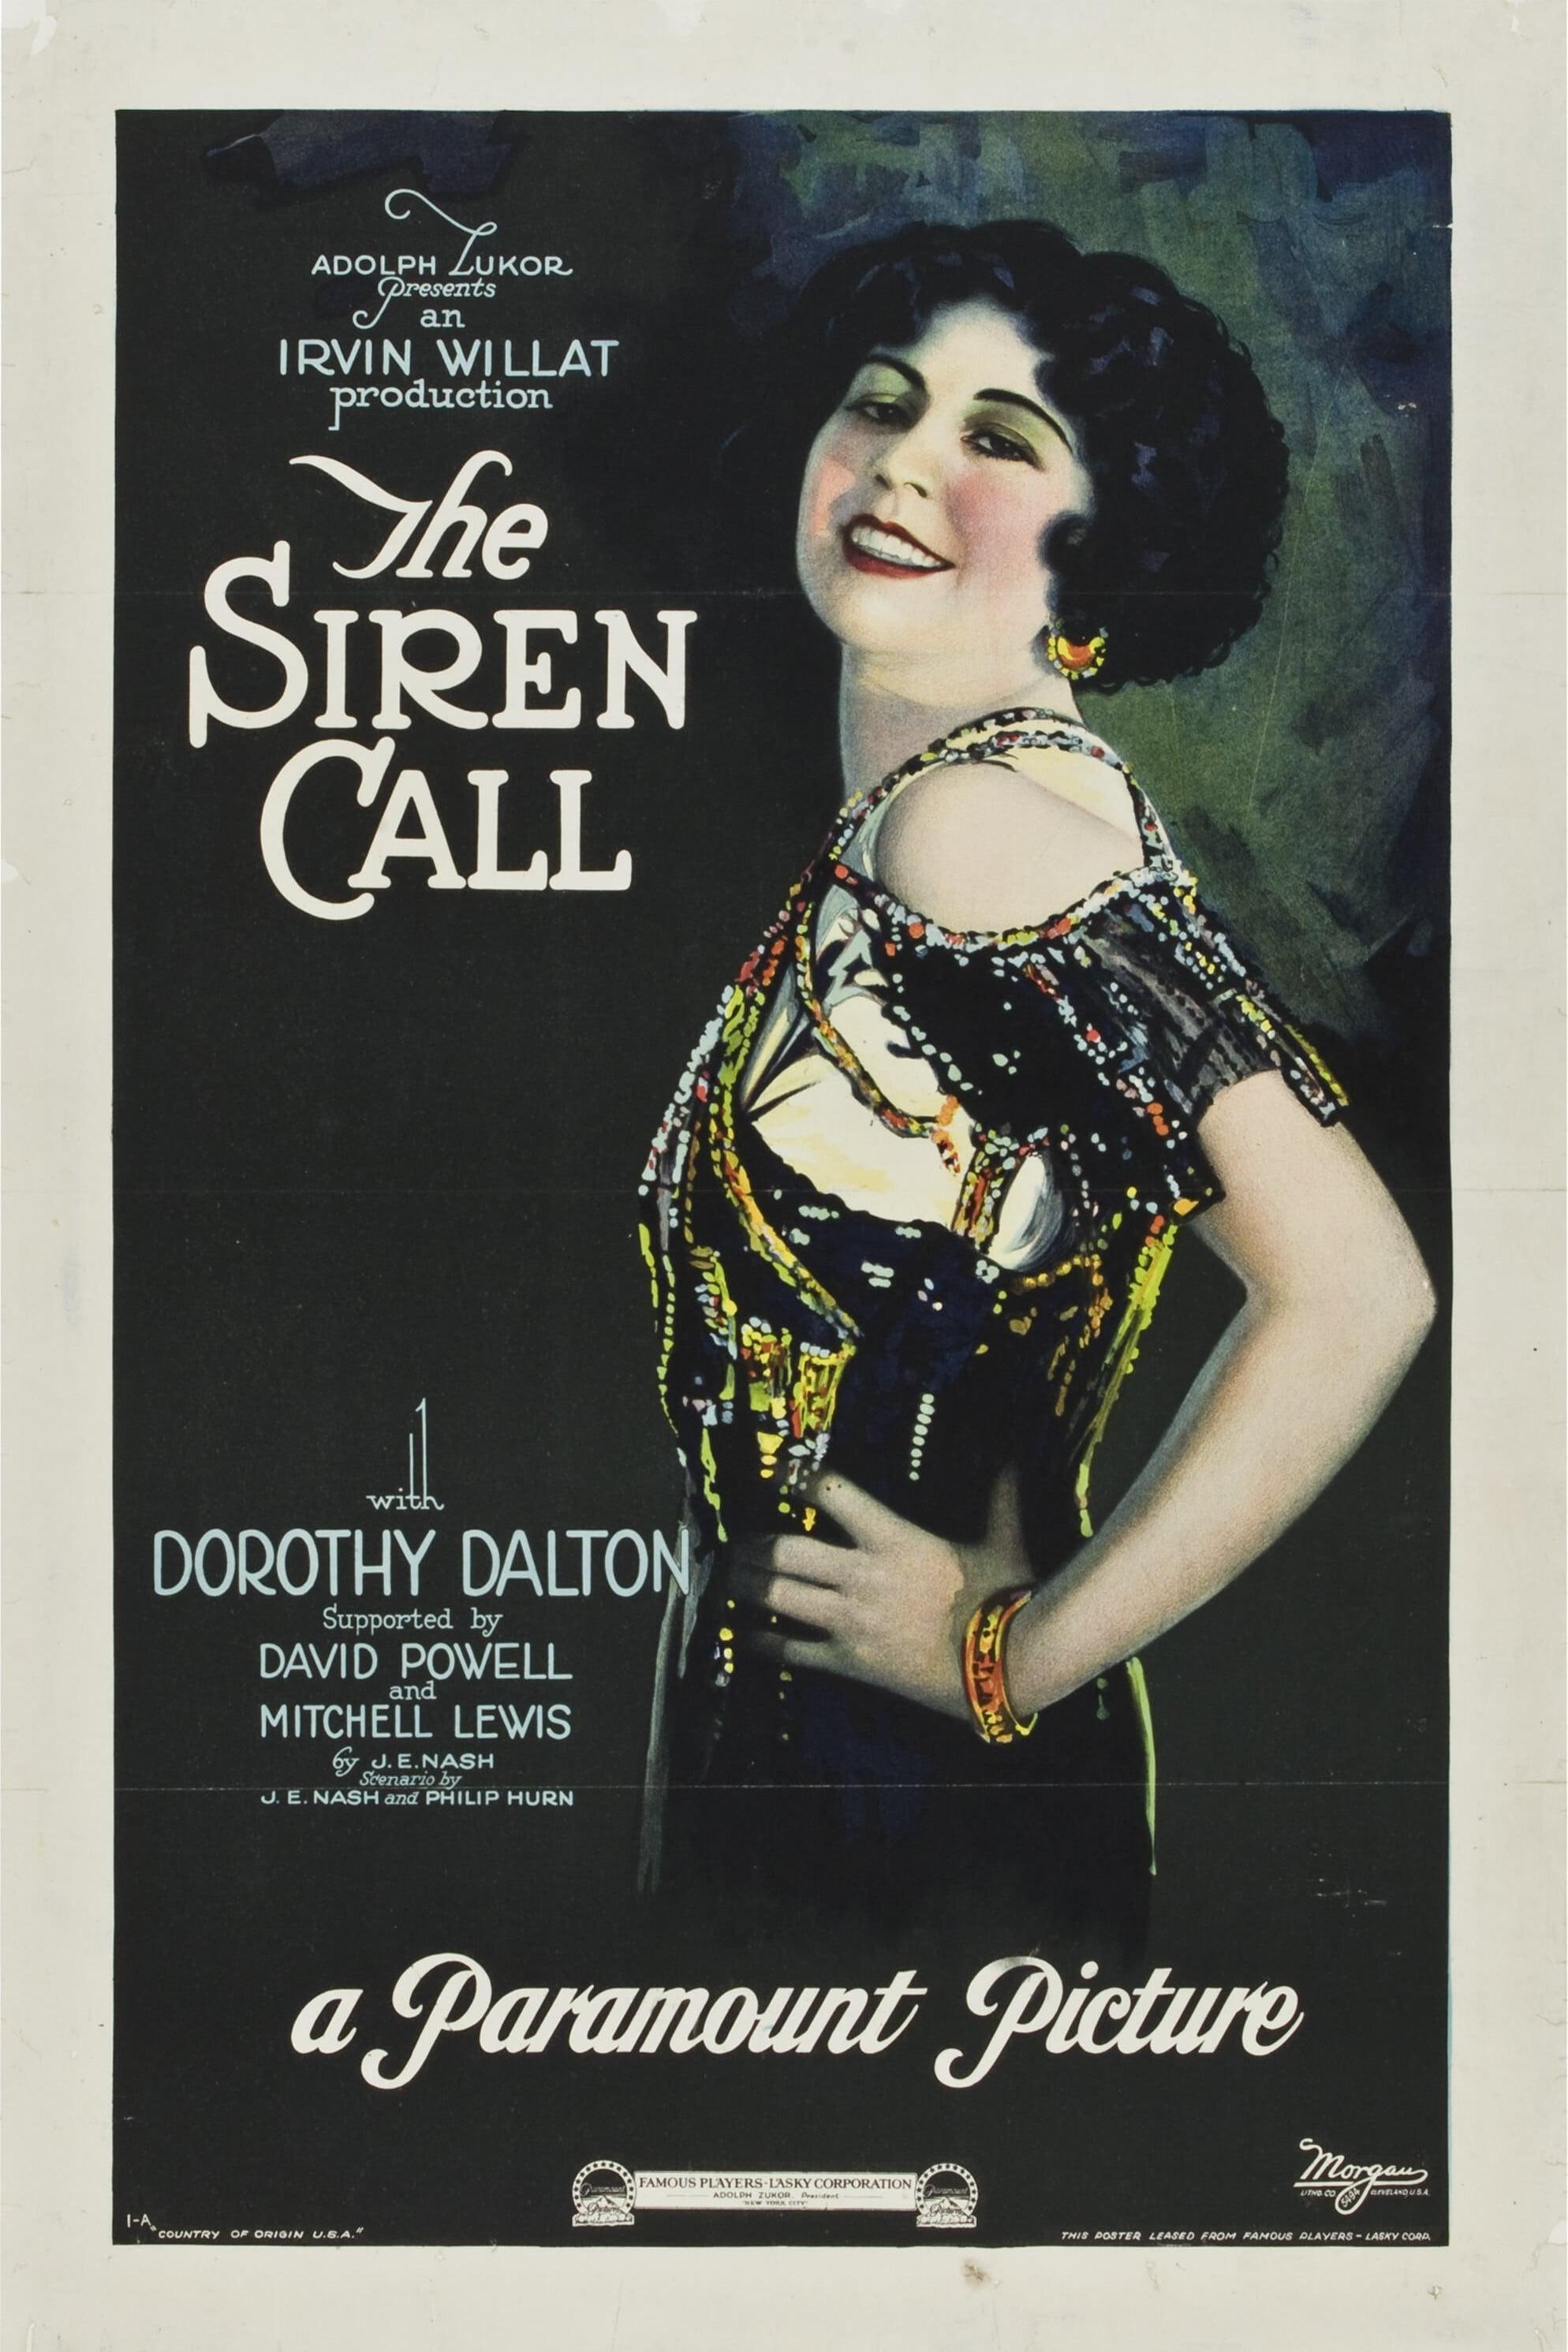 The Siren Call poster